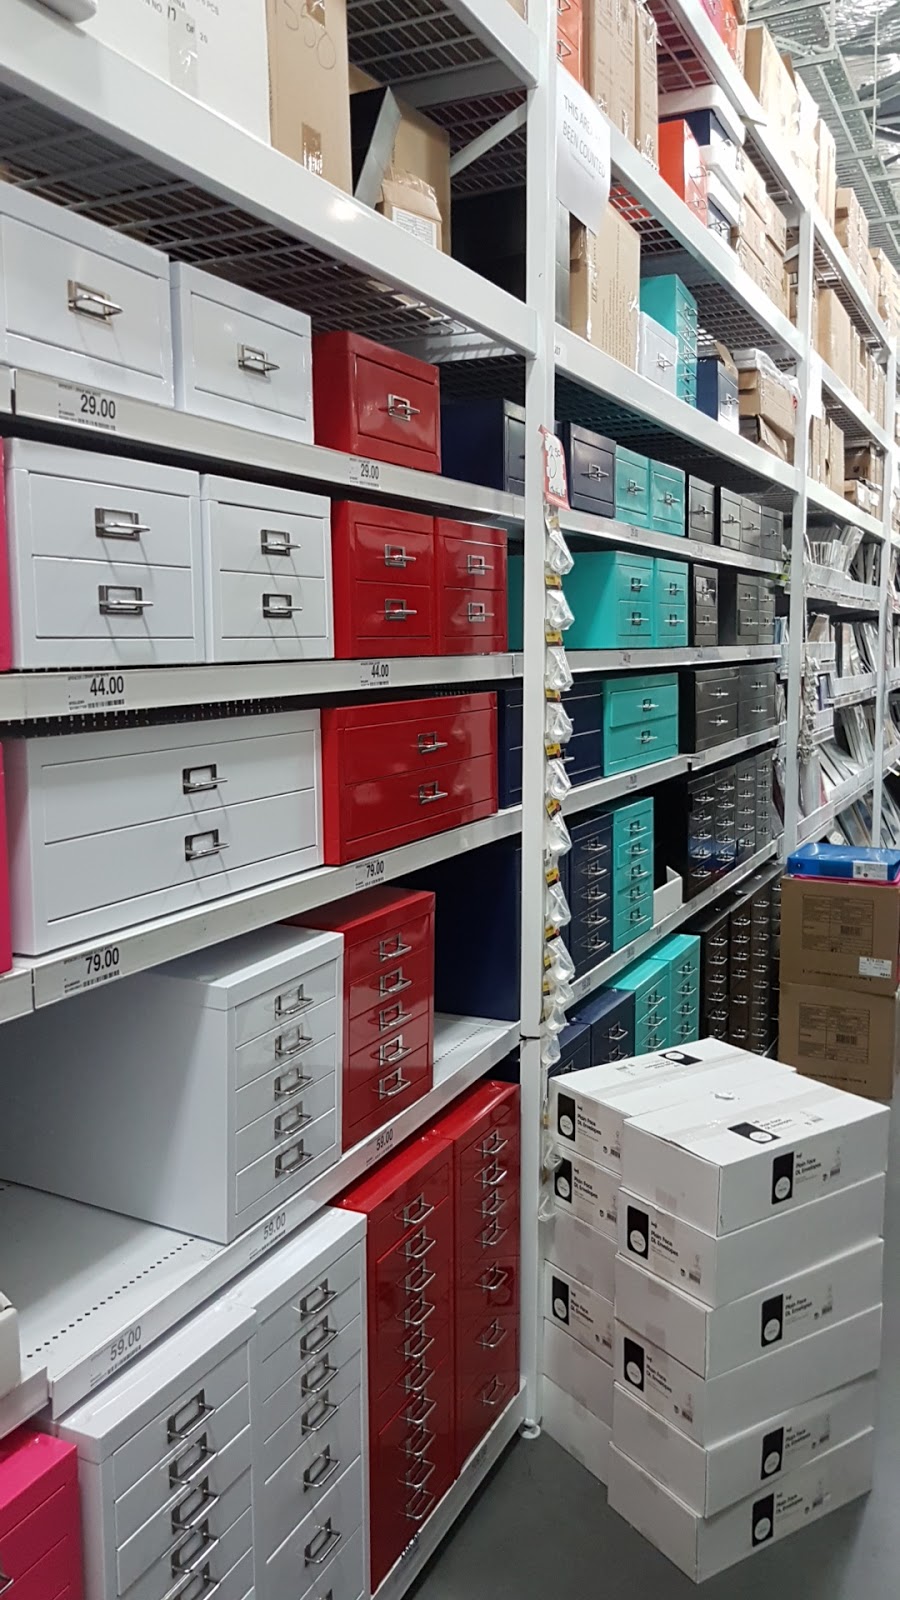 Officeworks Dandenong South | electronics store | Tenancy 5/55 - 67 Frankston - Dandenong Rd, Dandenong South VIC 3175, Australia | 0387887000 OR +61 3 8788 7000